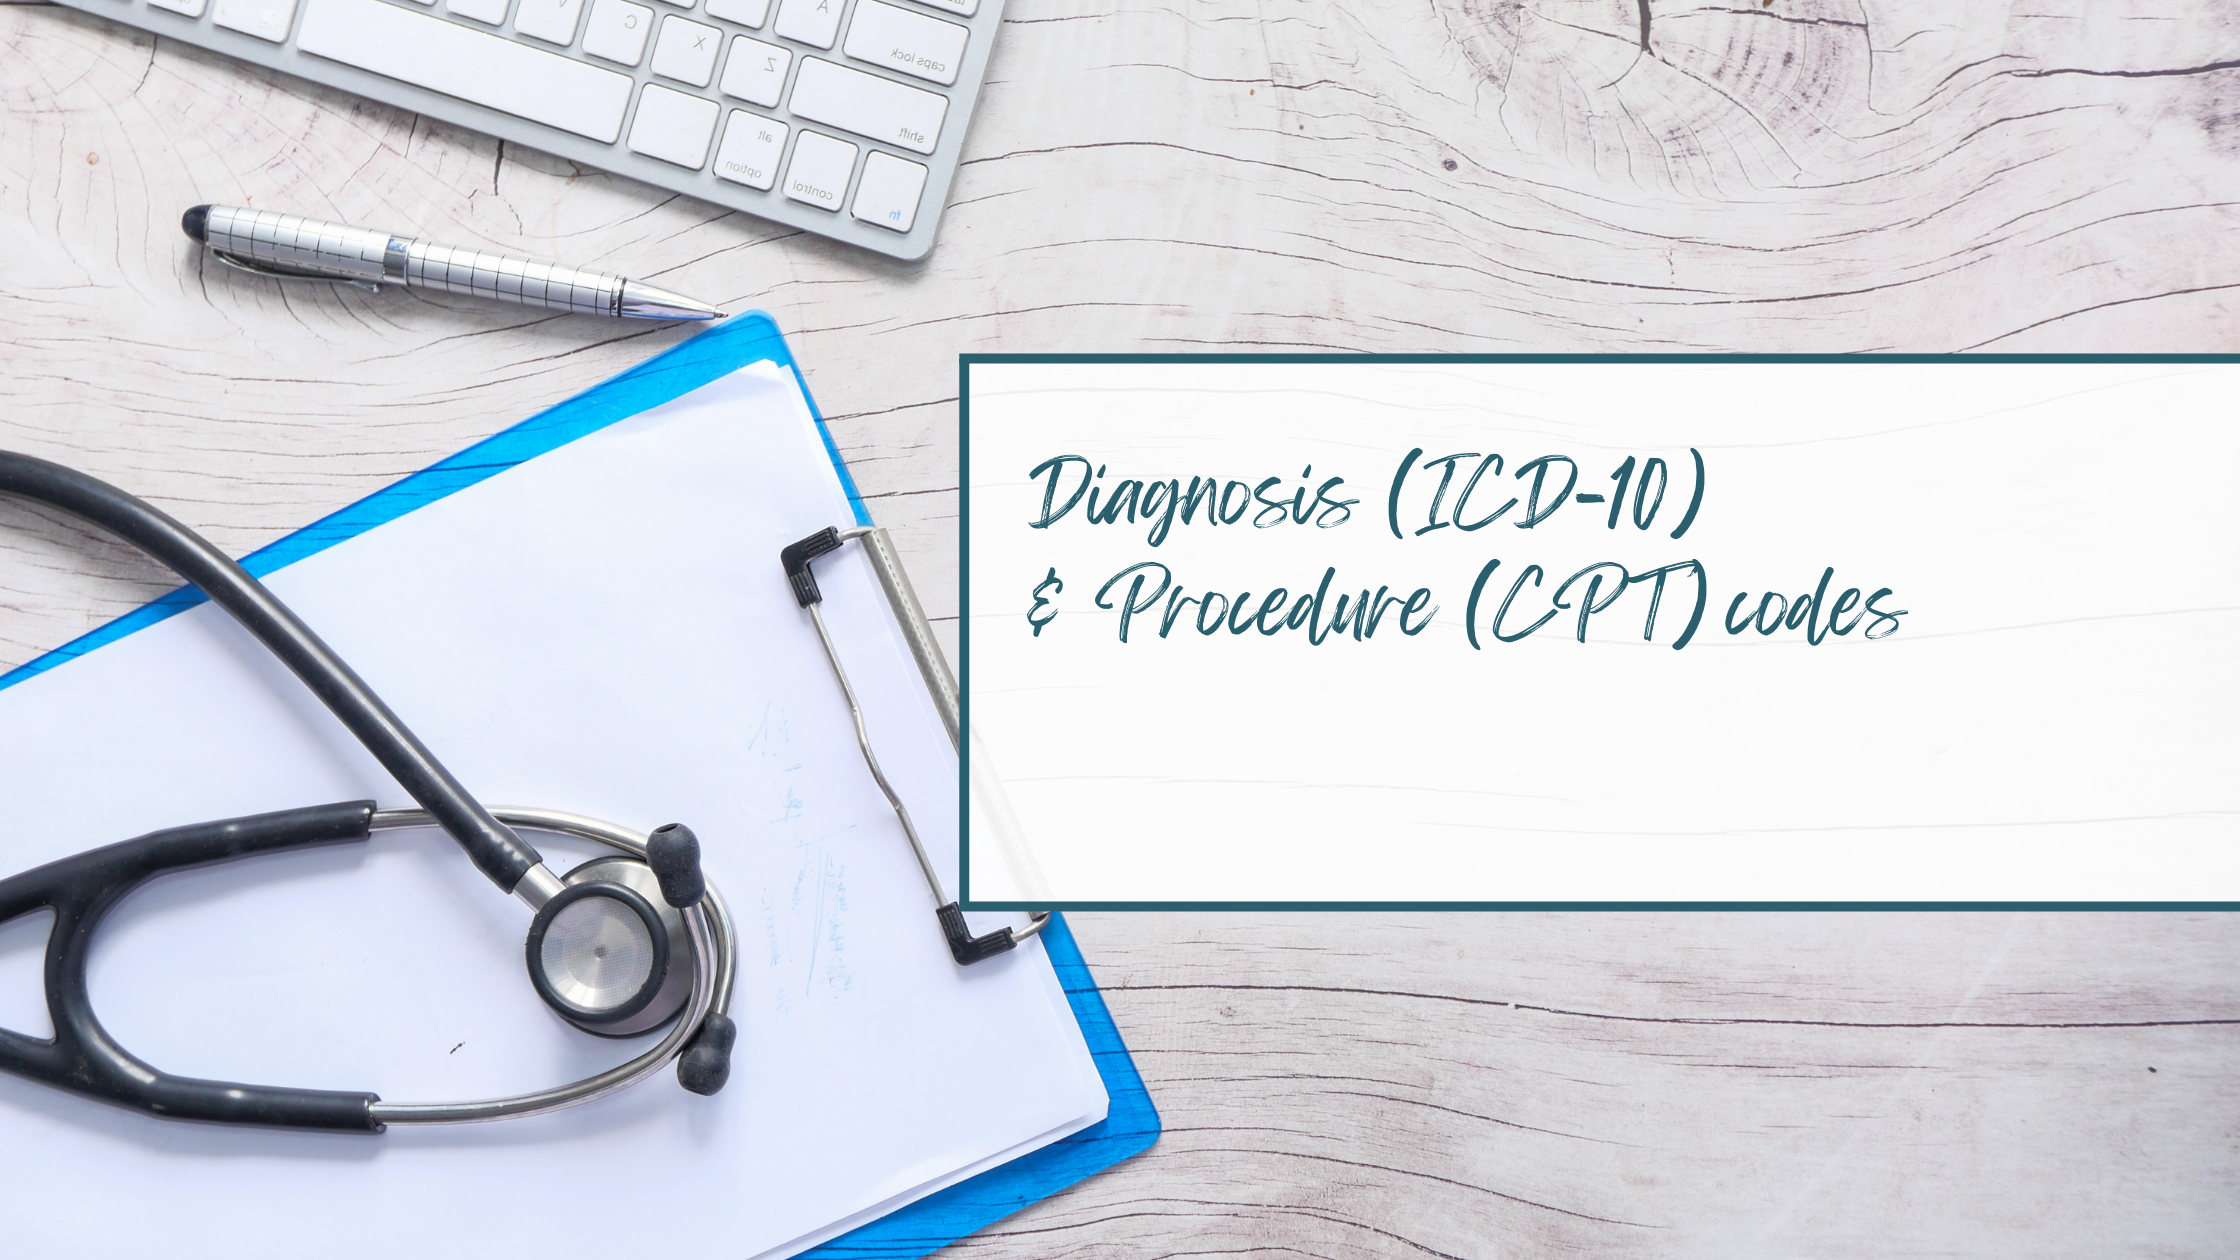 ICD-10 and CPT codes